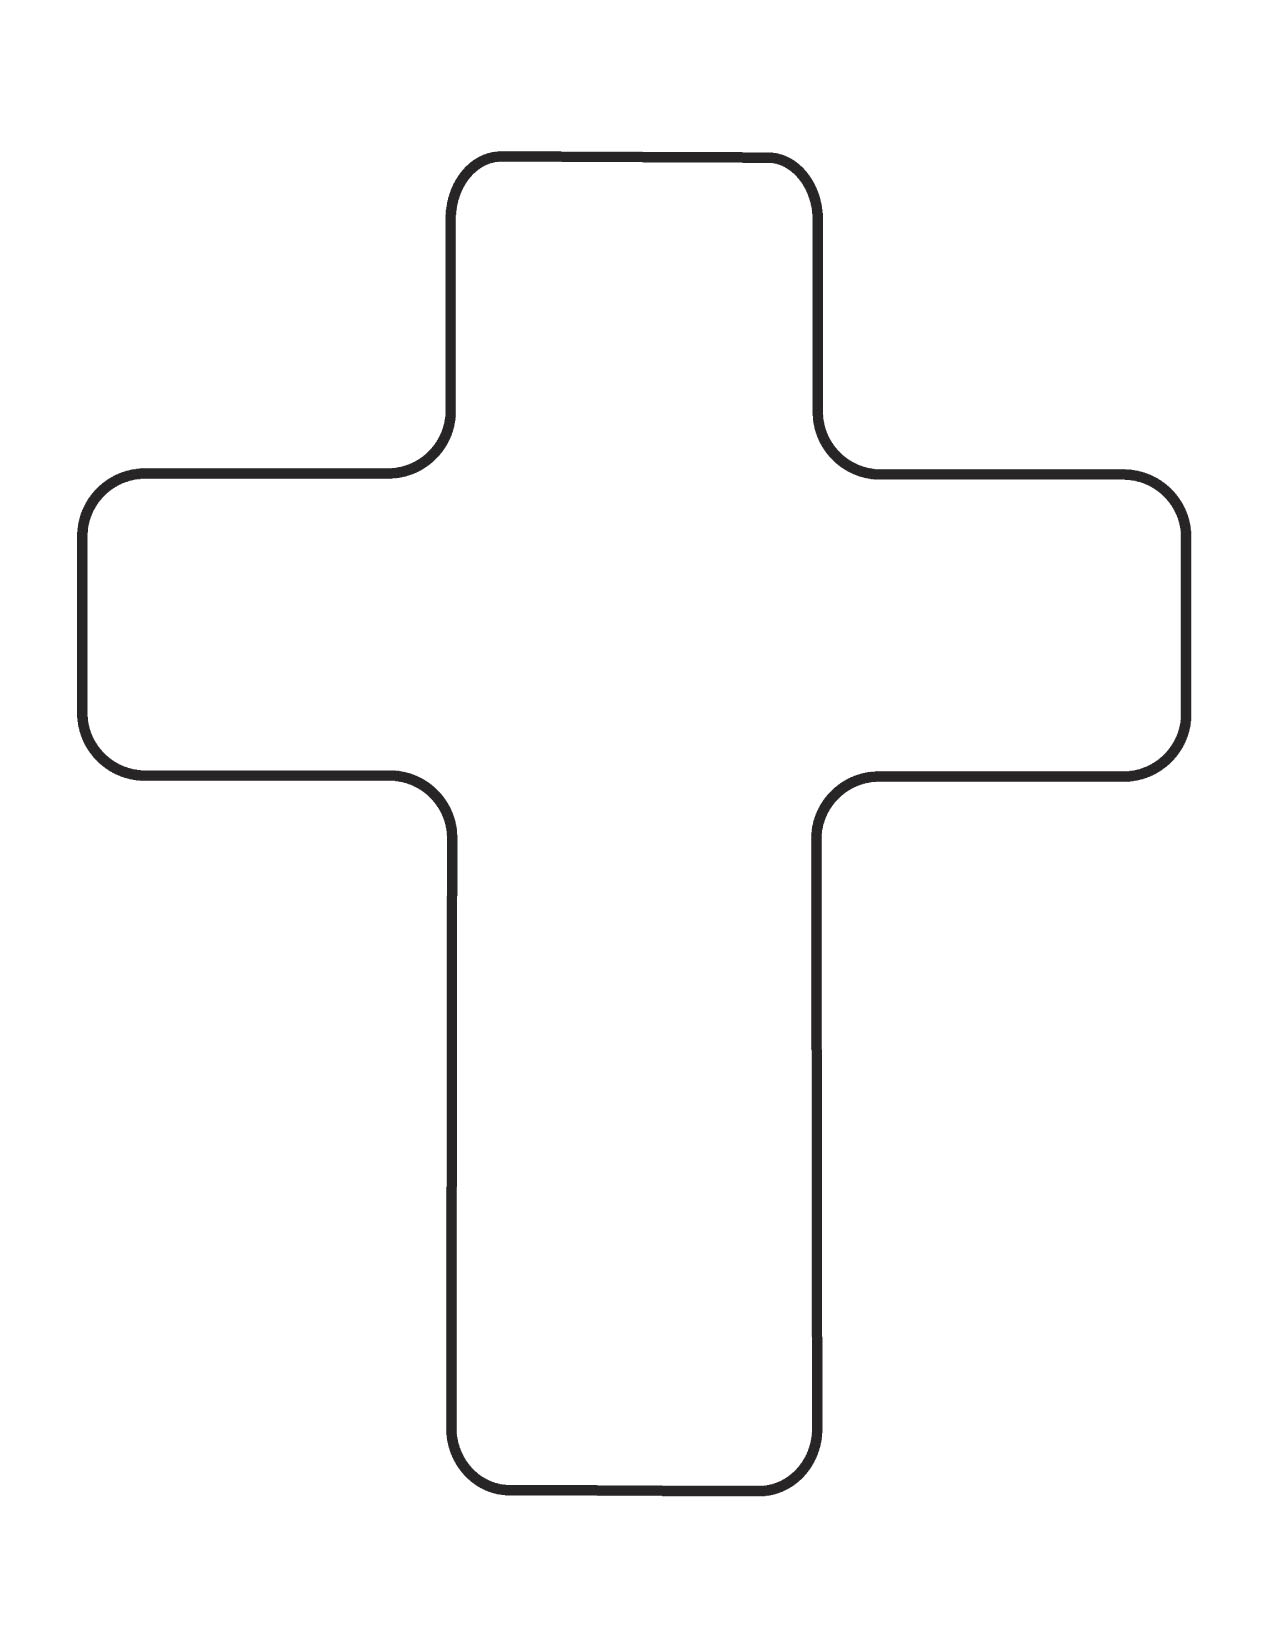 43 Printable Cross Pictures   Free Cliparts That You Can Download To    